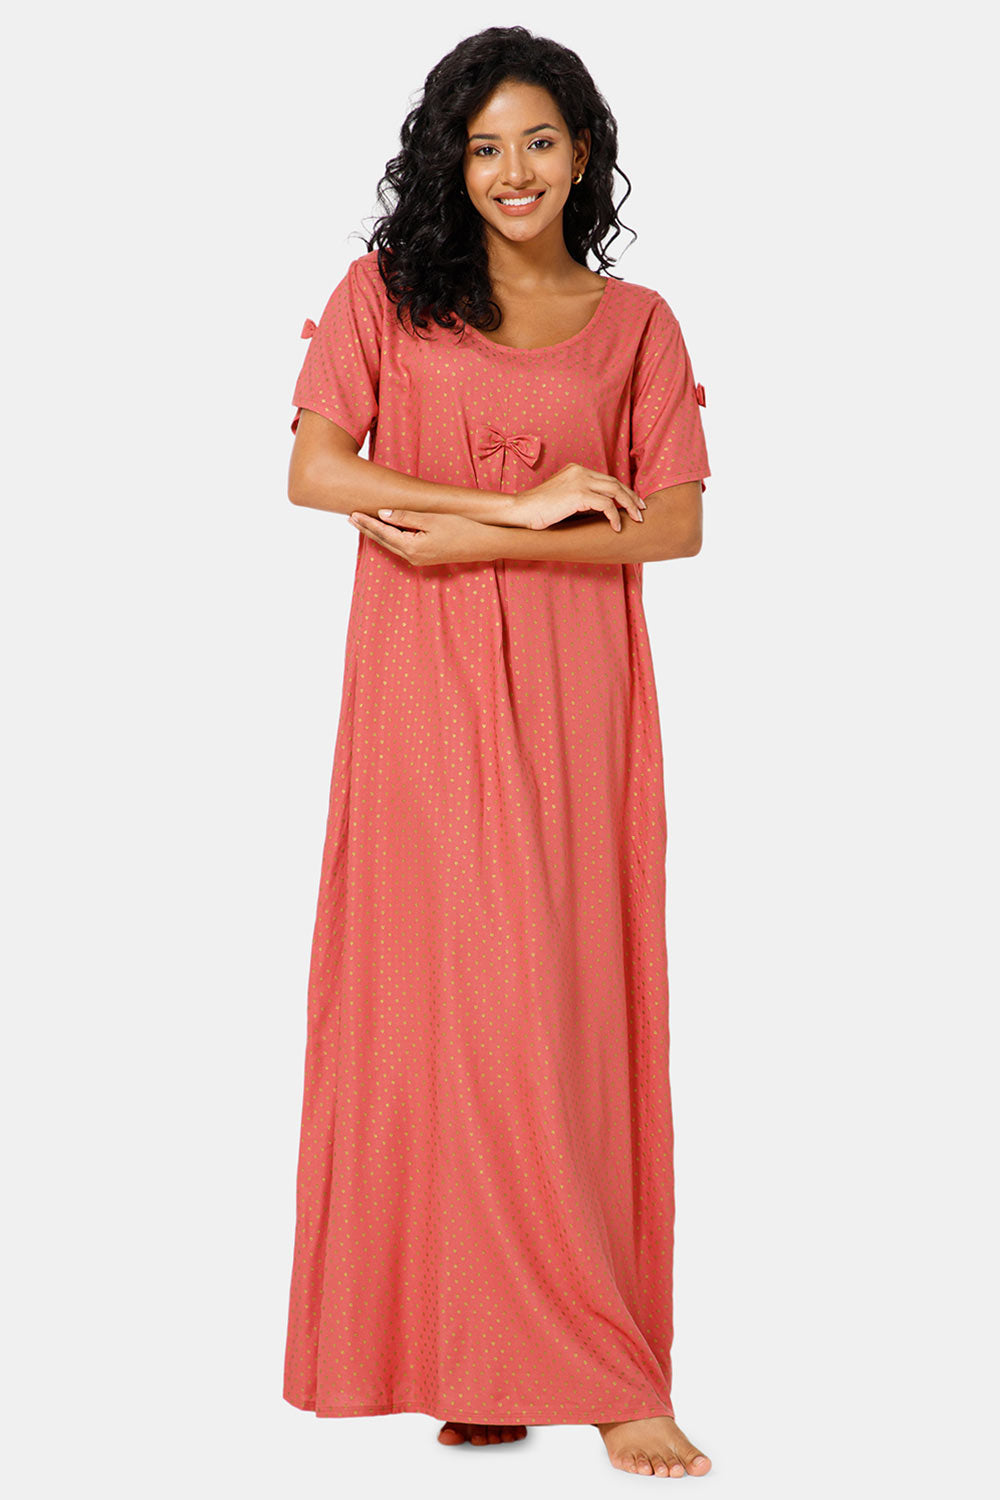 Ladies, These Breezy & Comfortable Nighties Will Give You A Good Night's  Sleep!